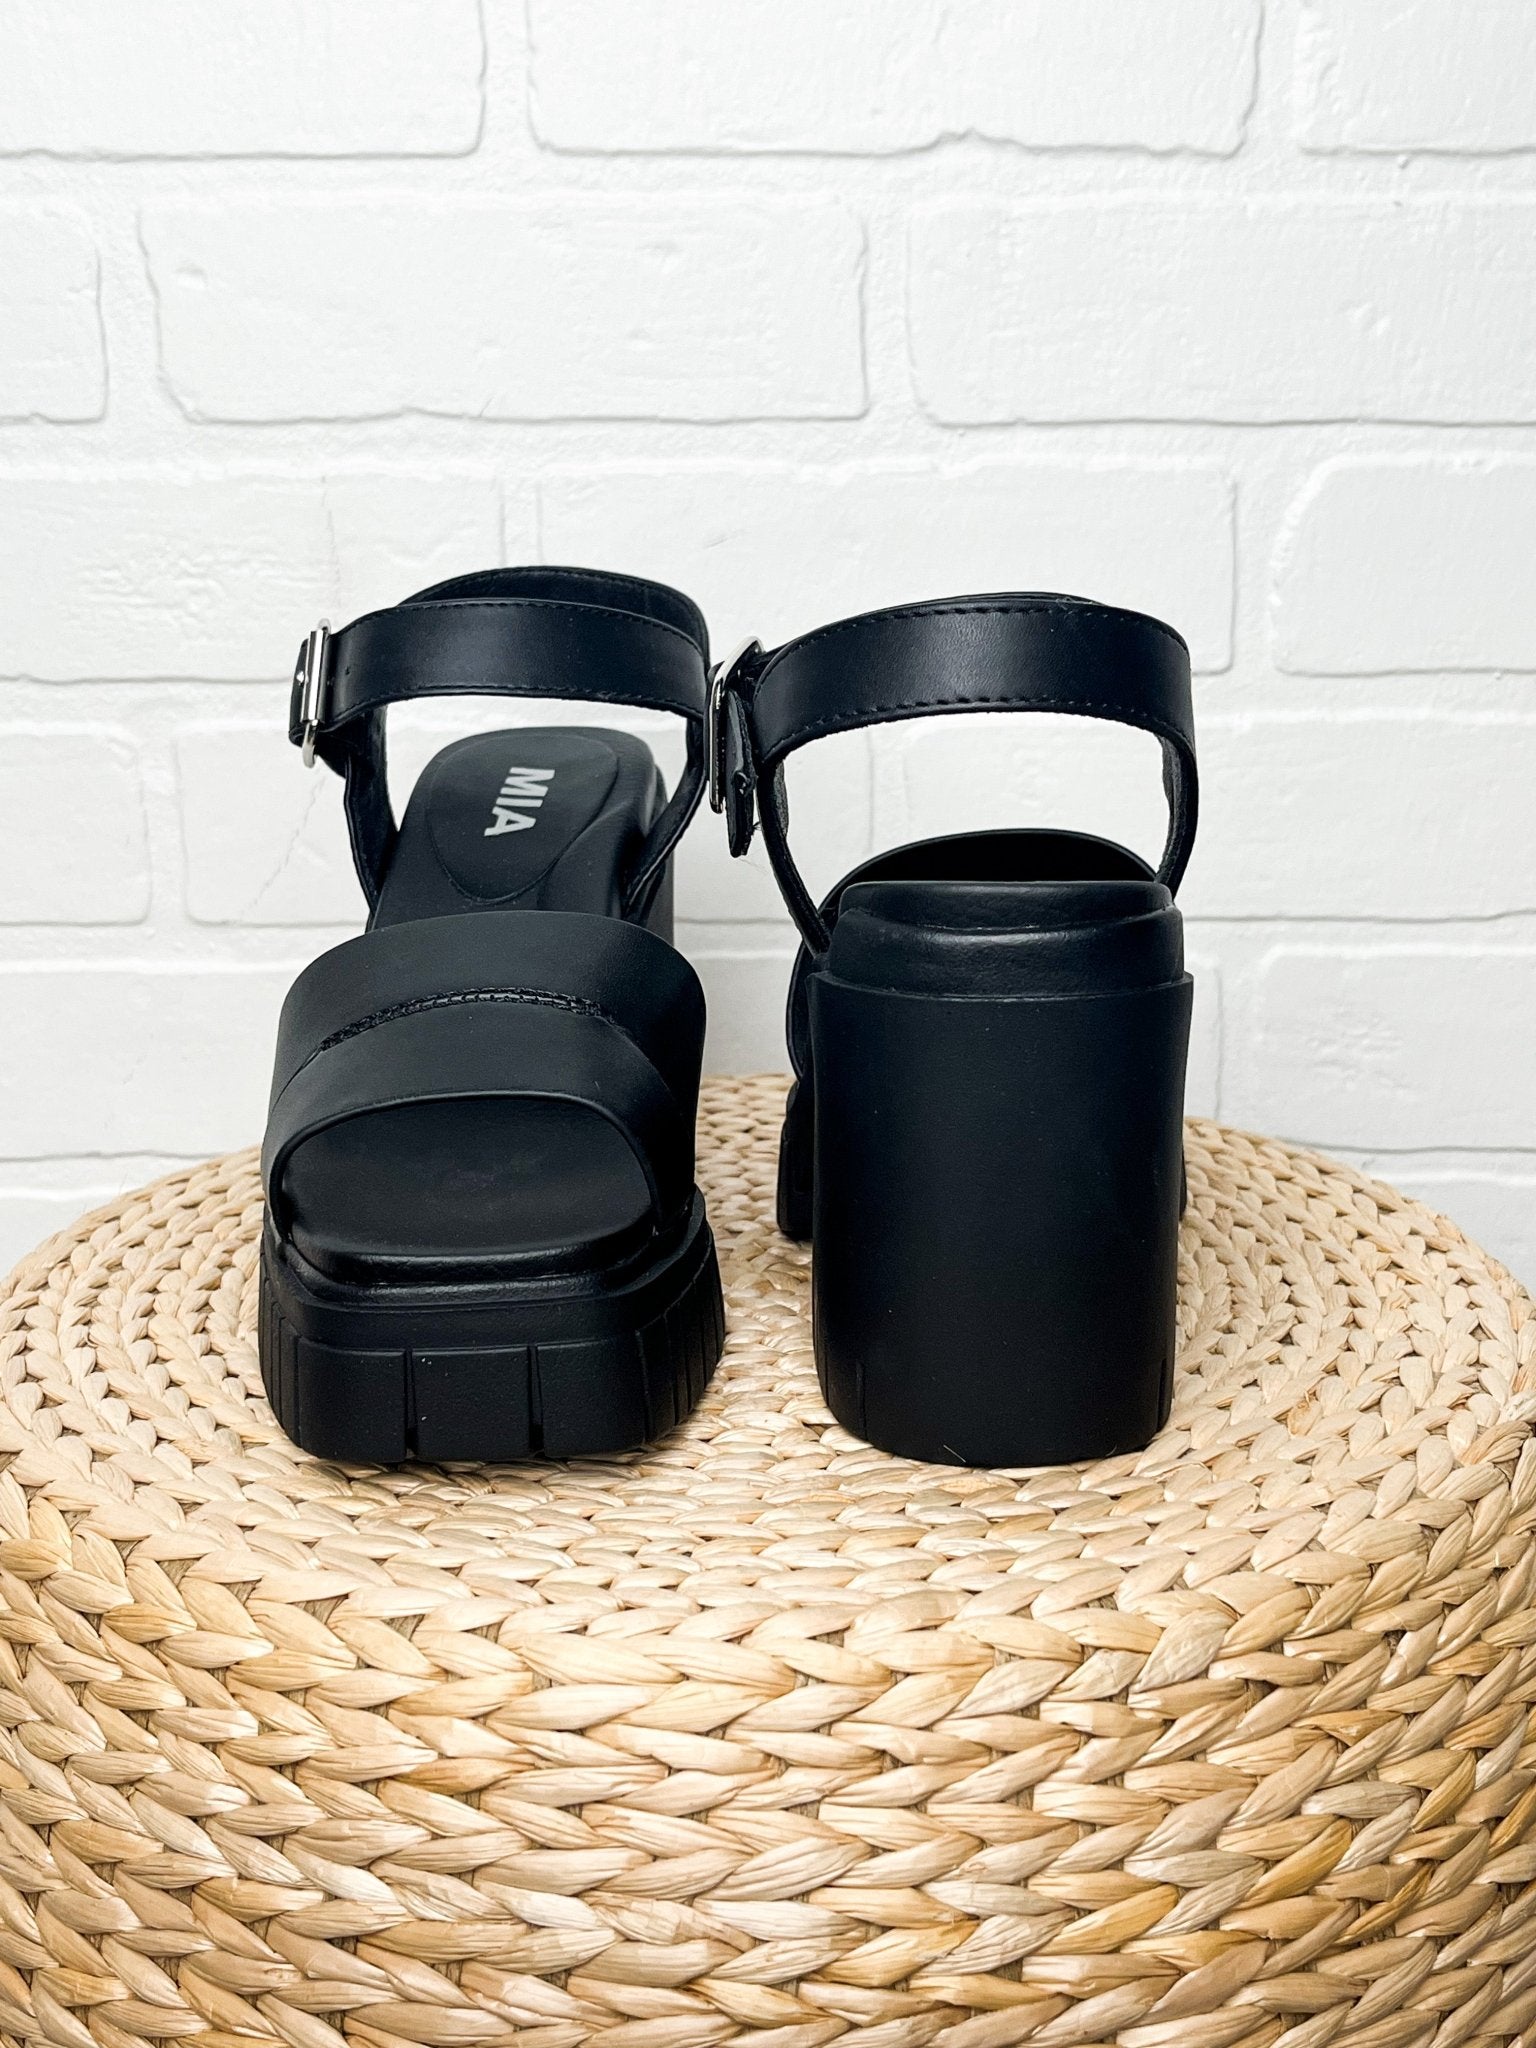 Nivea chunky sandal black - Affordable Shoes - Boutique Shoes at Lush Fashion Lounge Boutique in Oklahoma City